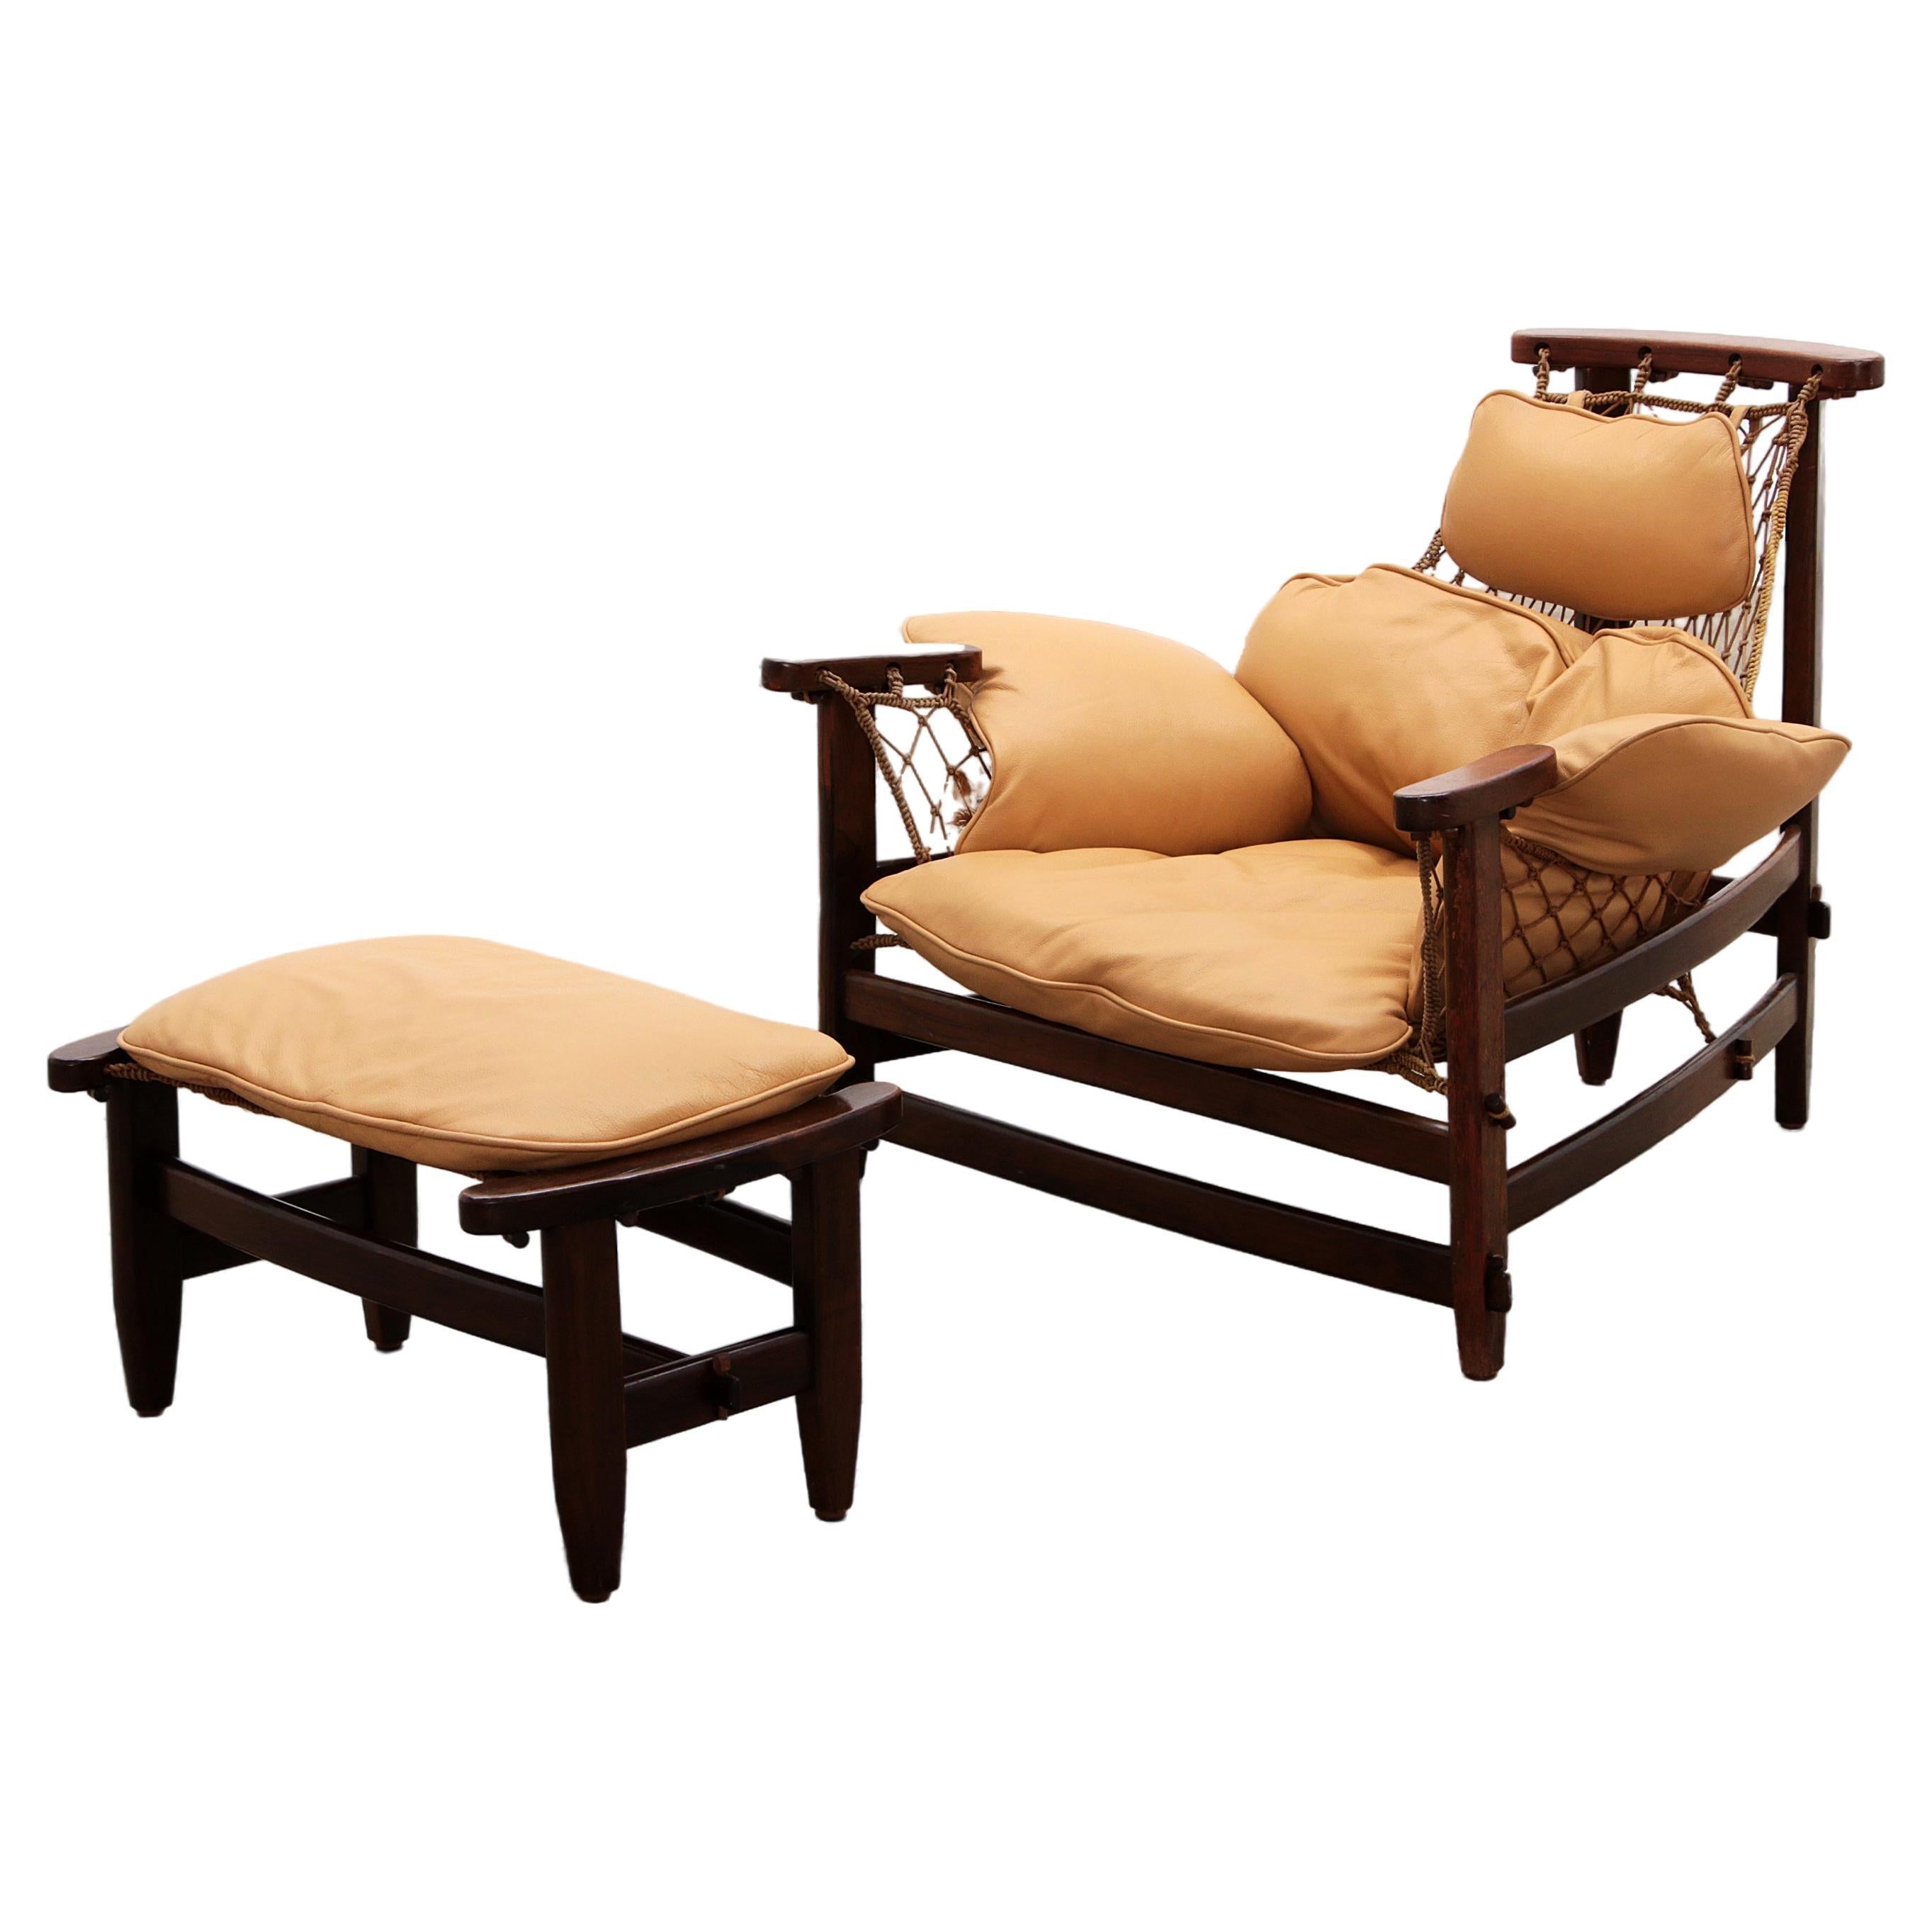 Jean Gillon 'Jangada' lounge chair and ottoman in tropical wood and leather.